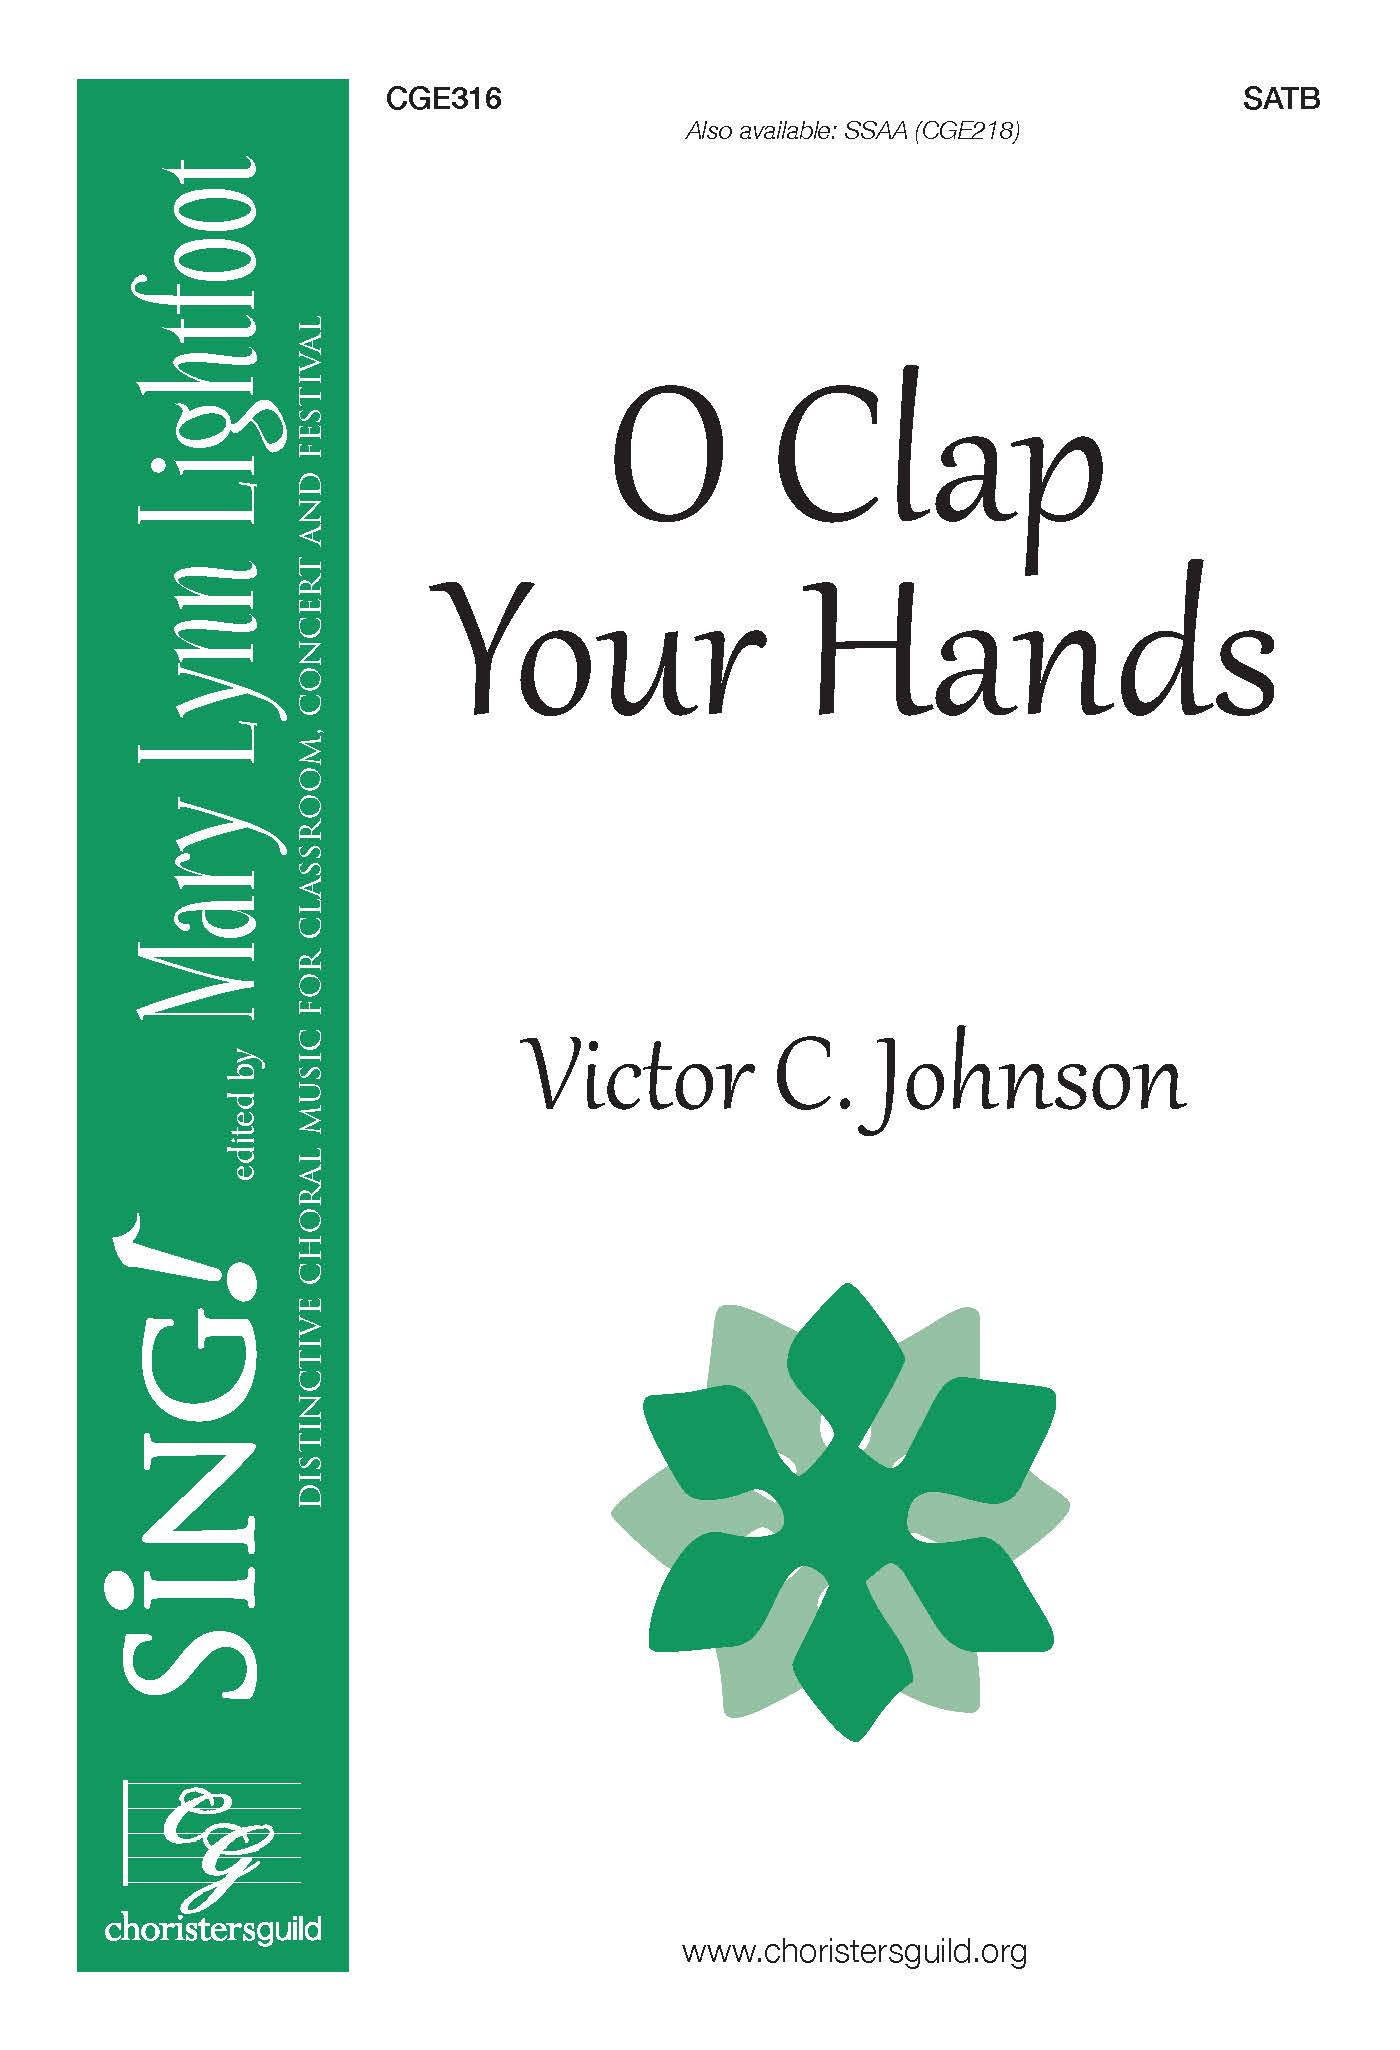 O Clap Your Hands - SATB